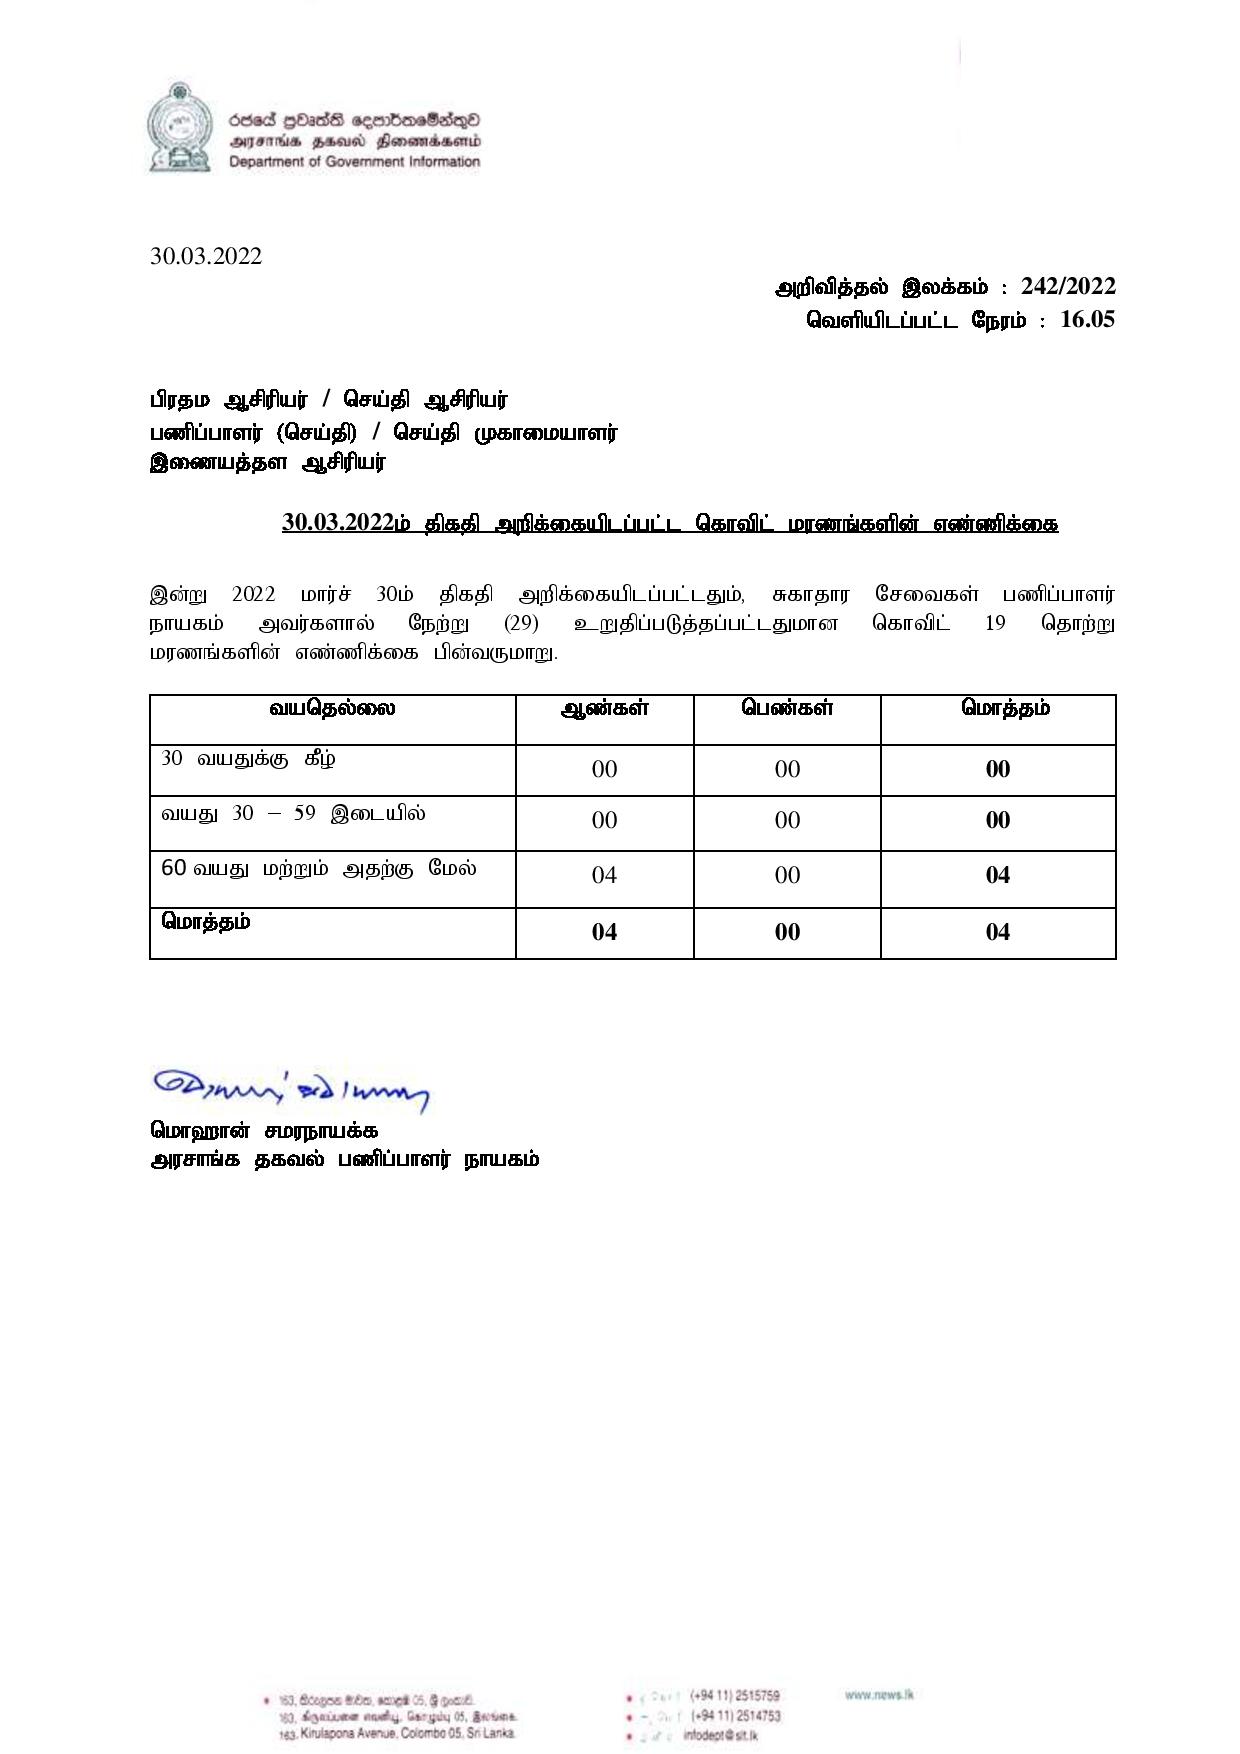 Release No 242 Tamil page 001